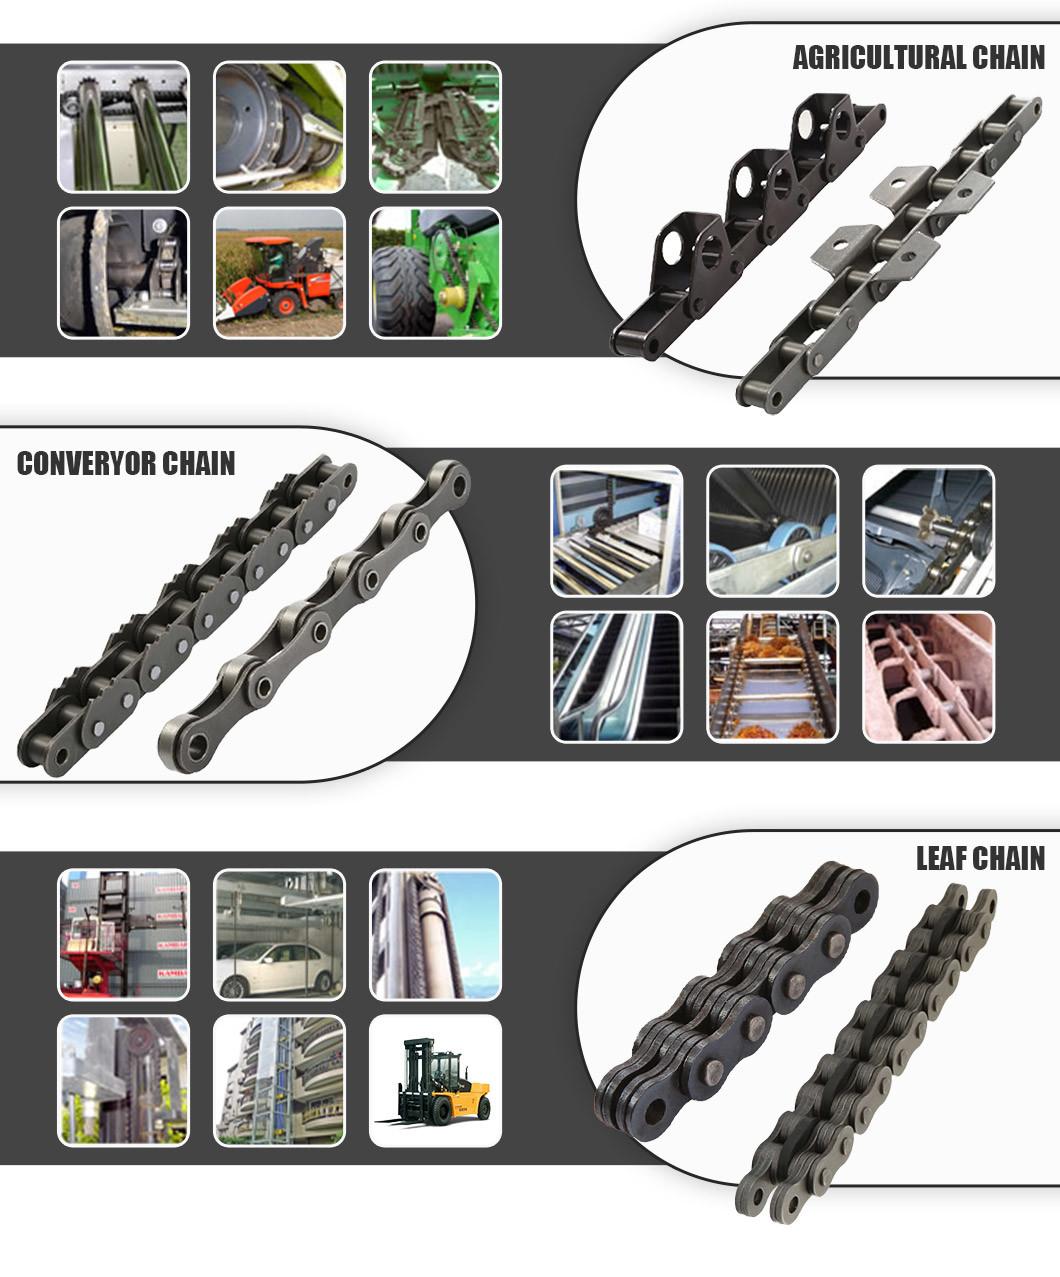 Made-to-Order Alloy/Carbon Steel Conveyor Agricultural Chain S55K1, S62A2K1, S77K1